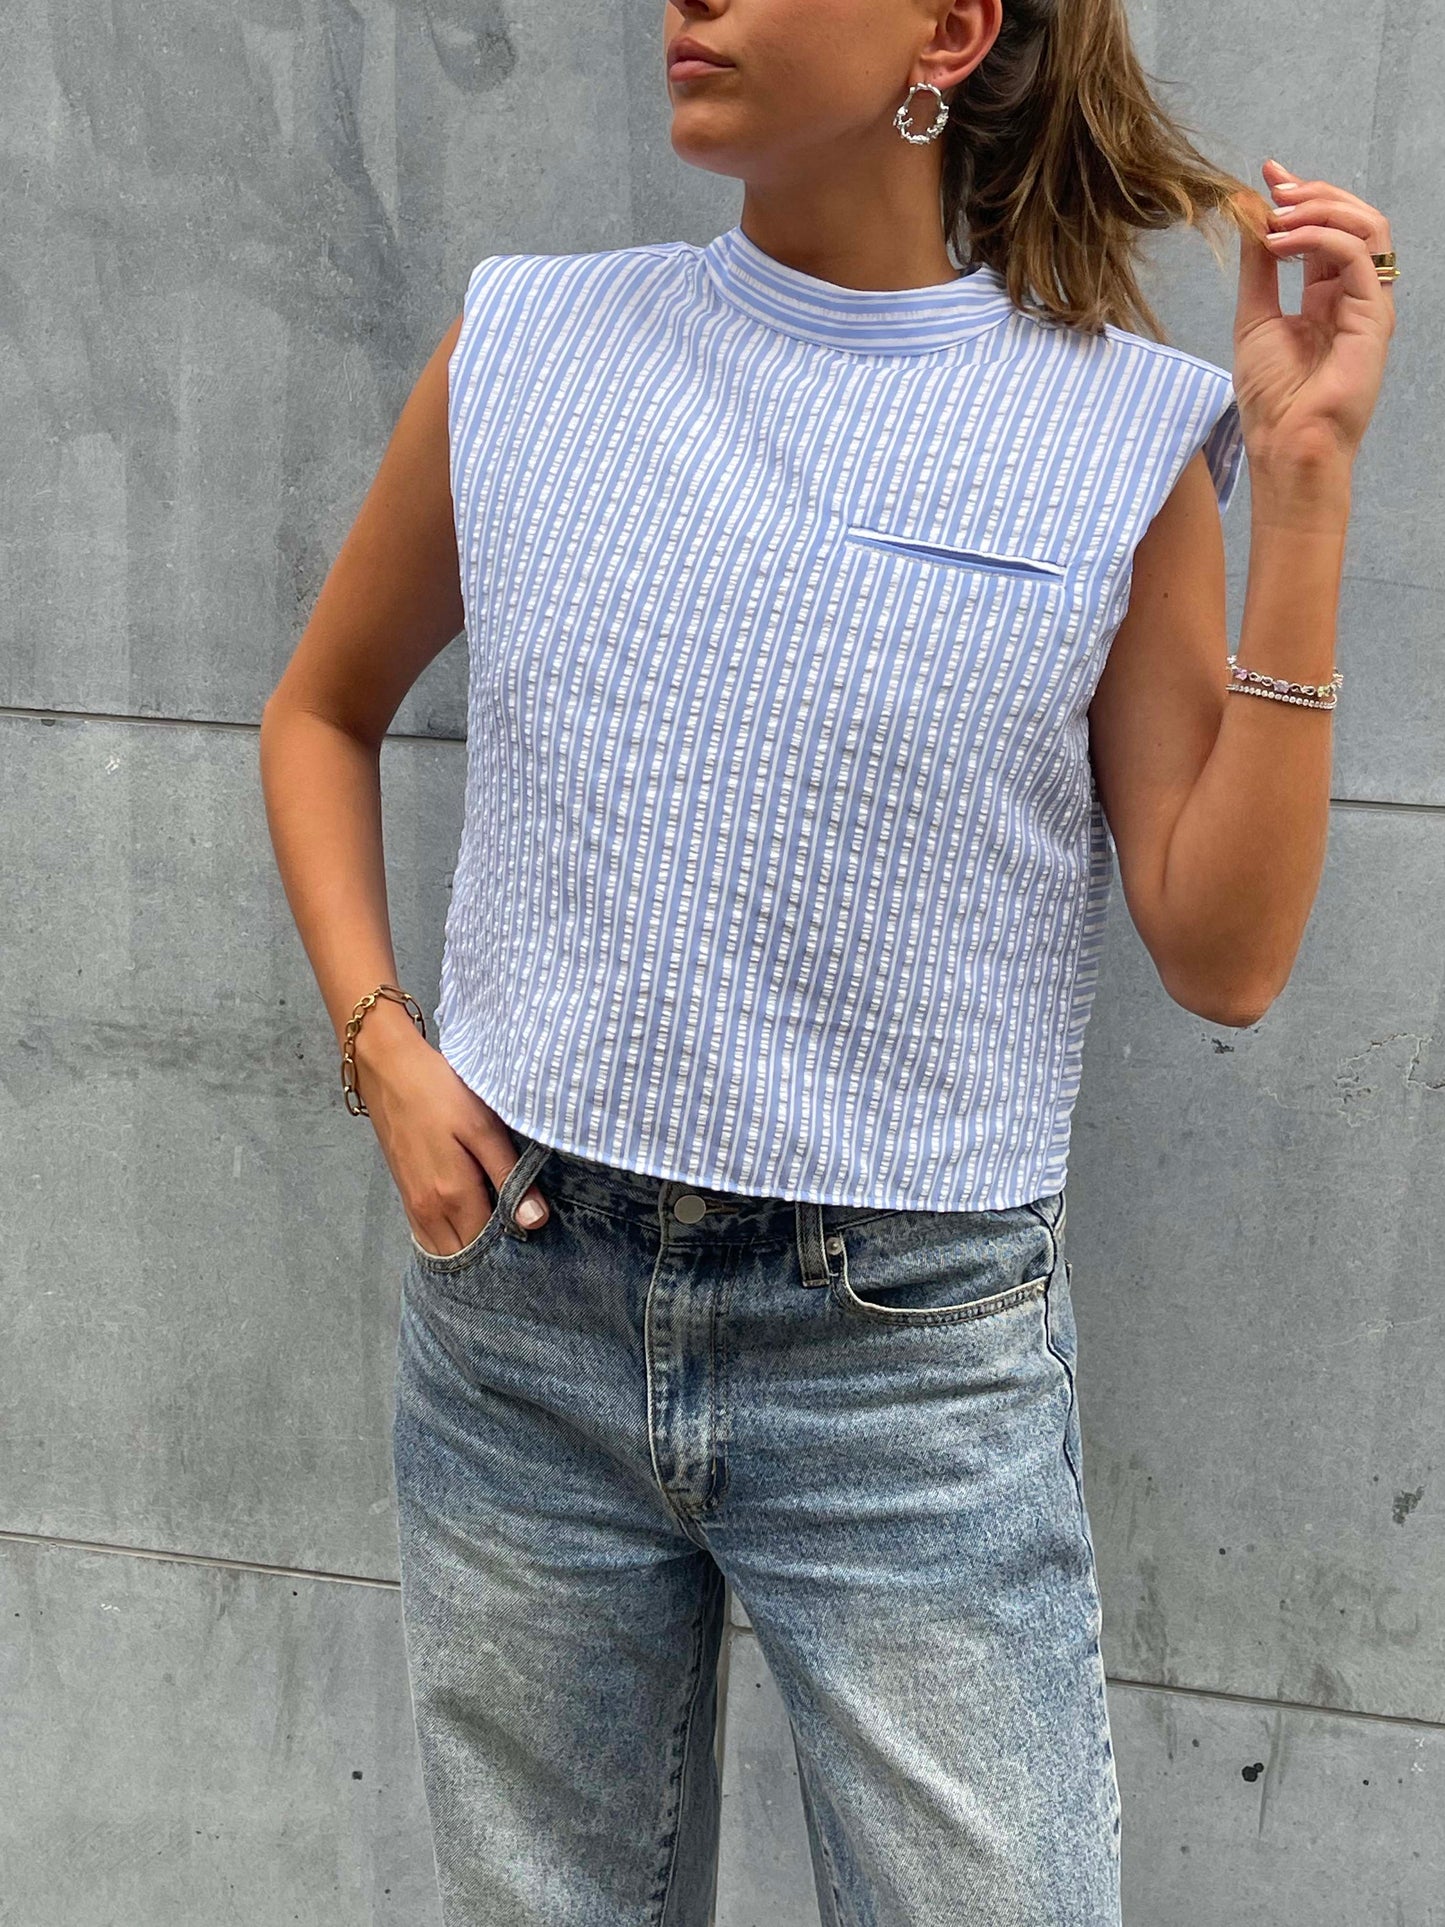 Padded Shirt Striped Top Skyblue